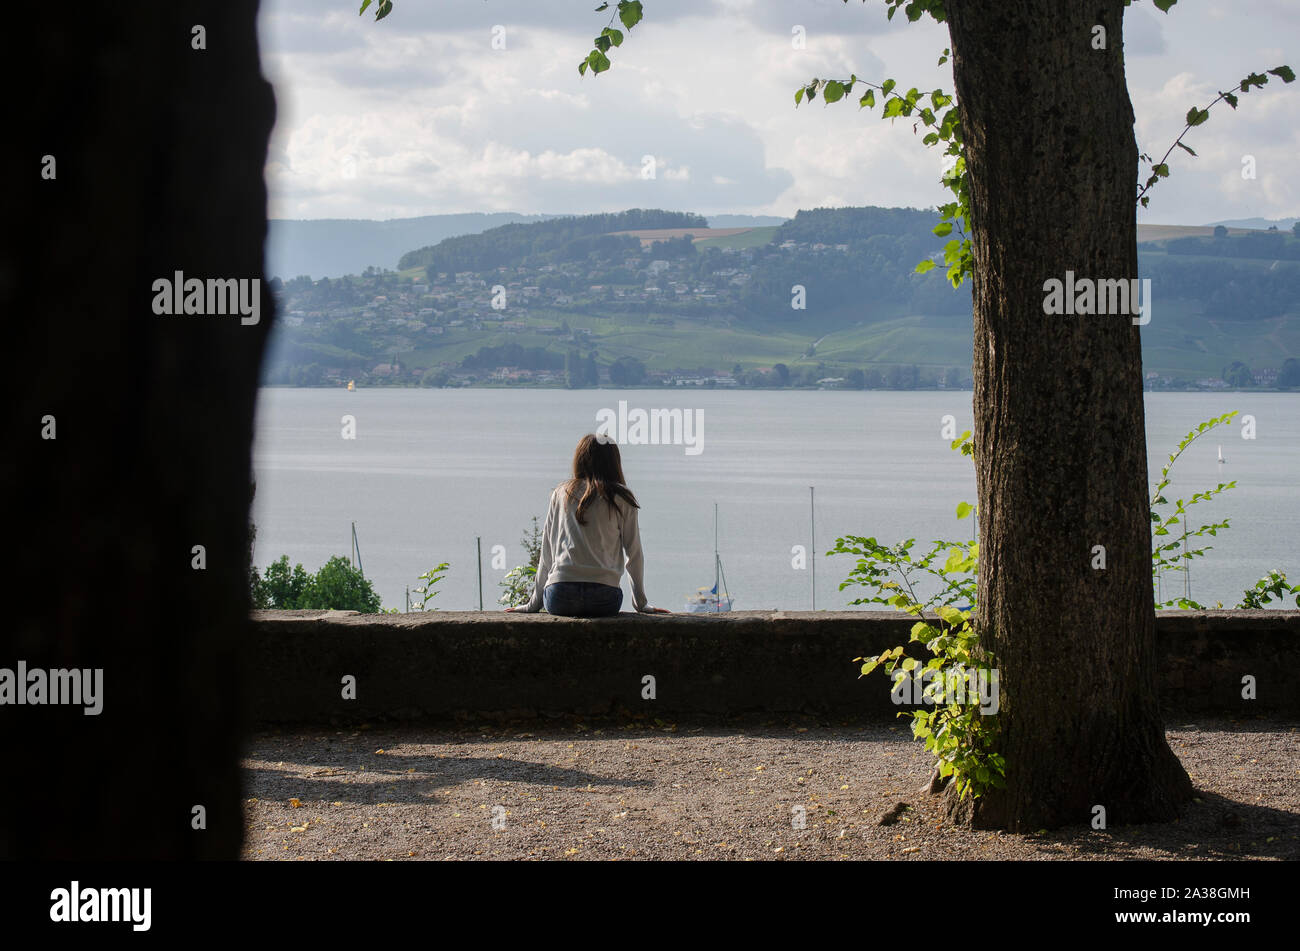 Teenage girl sitting by a lake looking at view, Switzerland Stock Photo